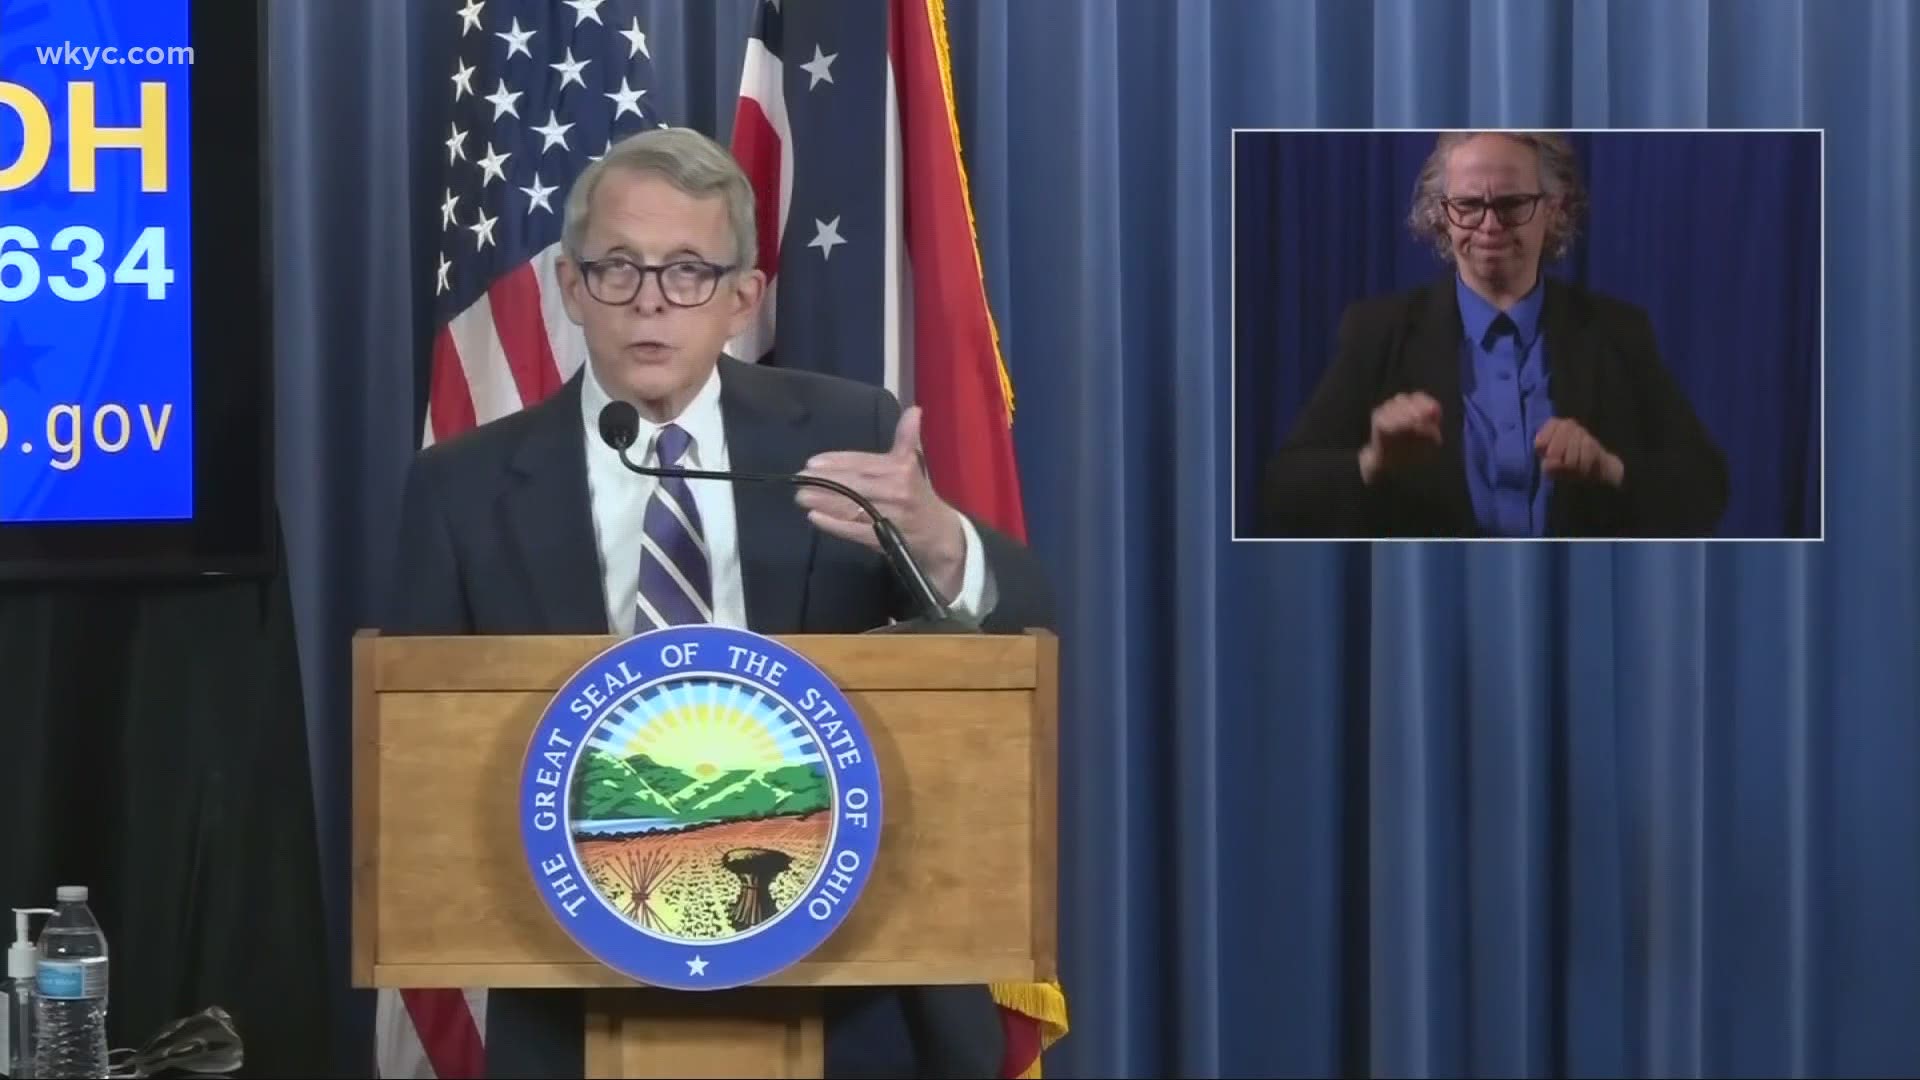 DeWine is calling for the Ohio Liquor Control Commission to emergency rule related to liquor sales amid the pandemic. The ruling would take effect as early as Friday